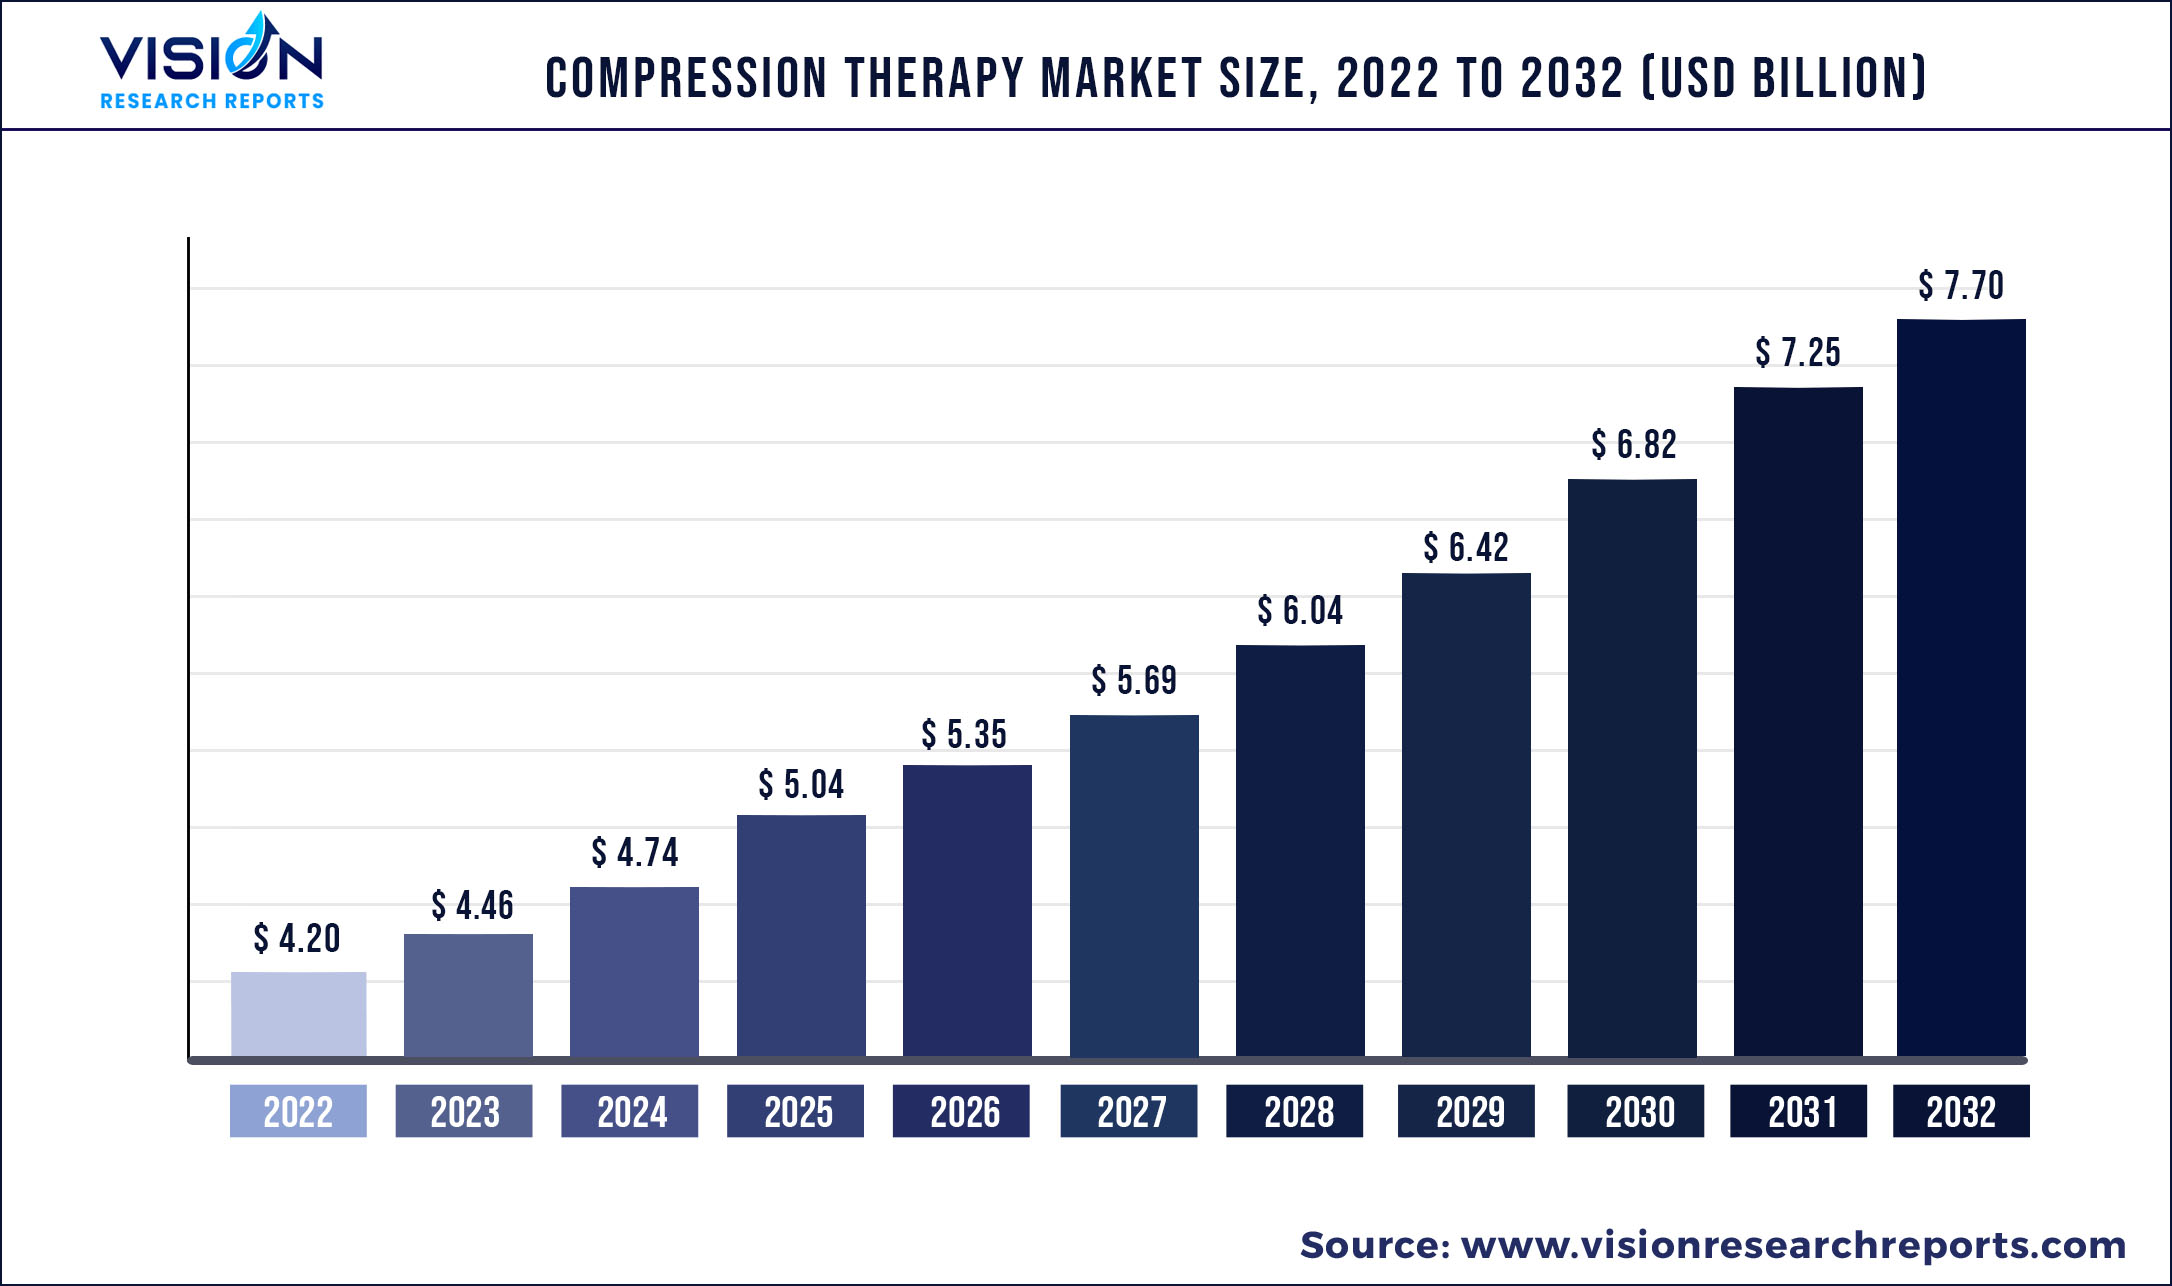 Compression Therapy Market Size 2022 to 2032